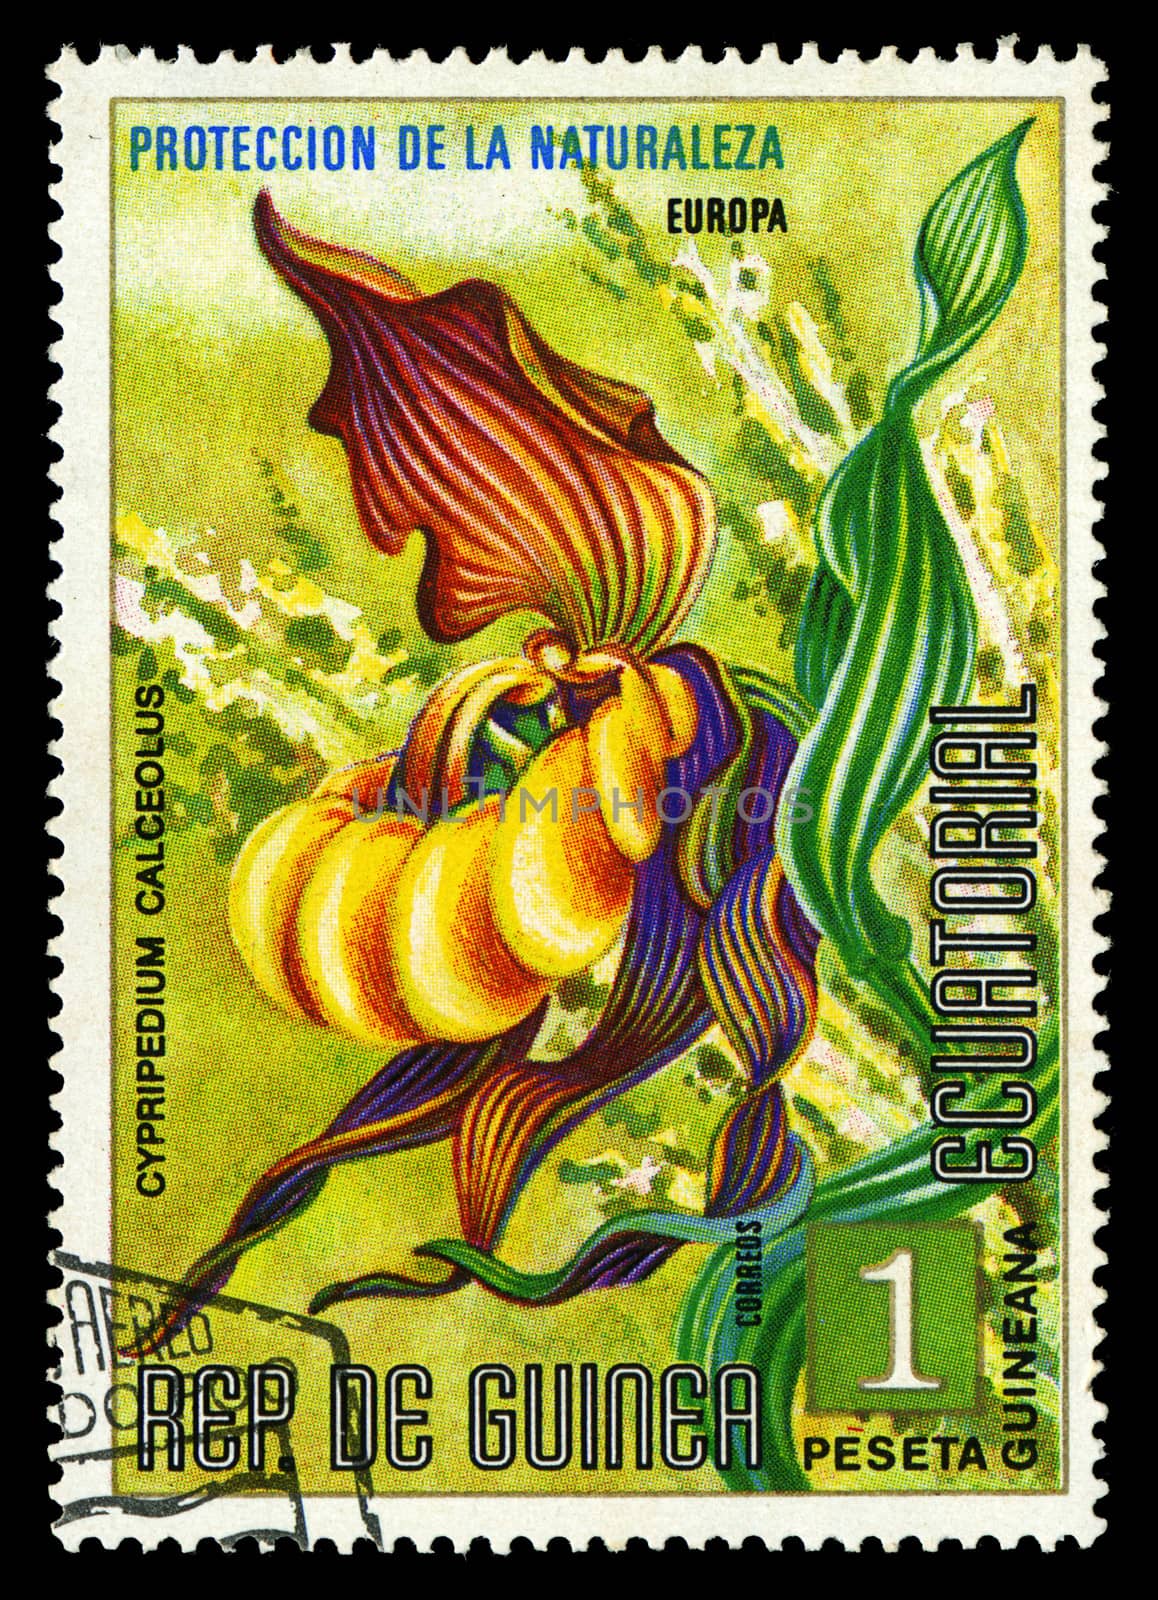 EQUATORIAL GUINEA - CIRCA 1974: A stamp printed in Equatorial Guinea shows Cypripedium Calceolus, series is devoted to flowers, circa 1974 by Zhukow